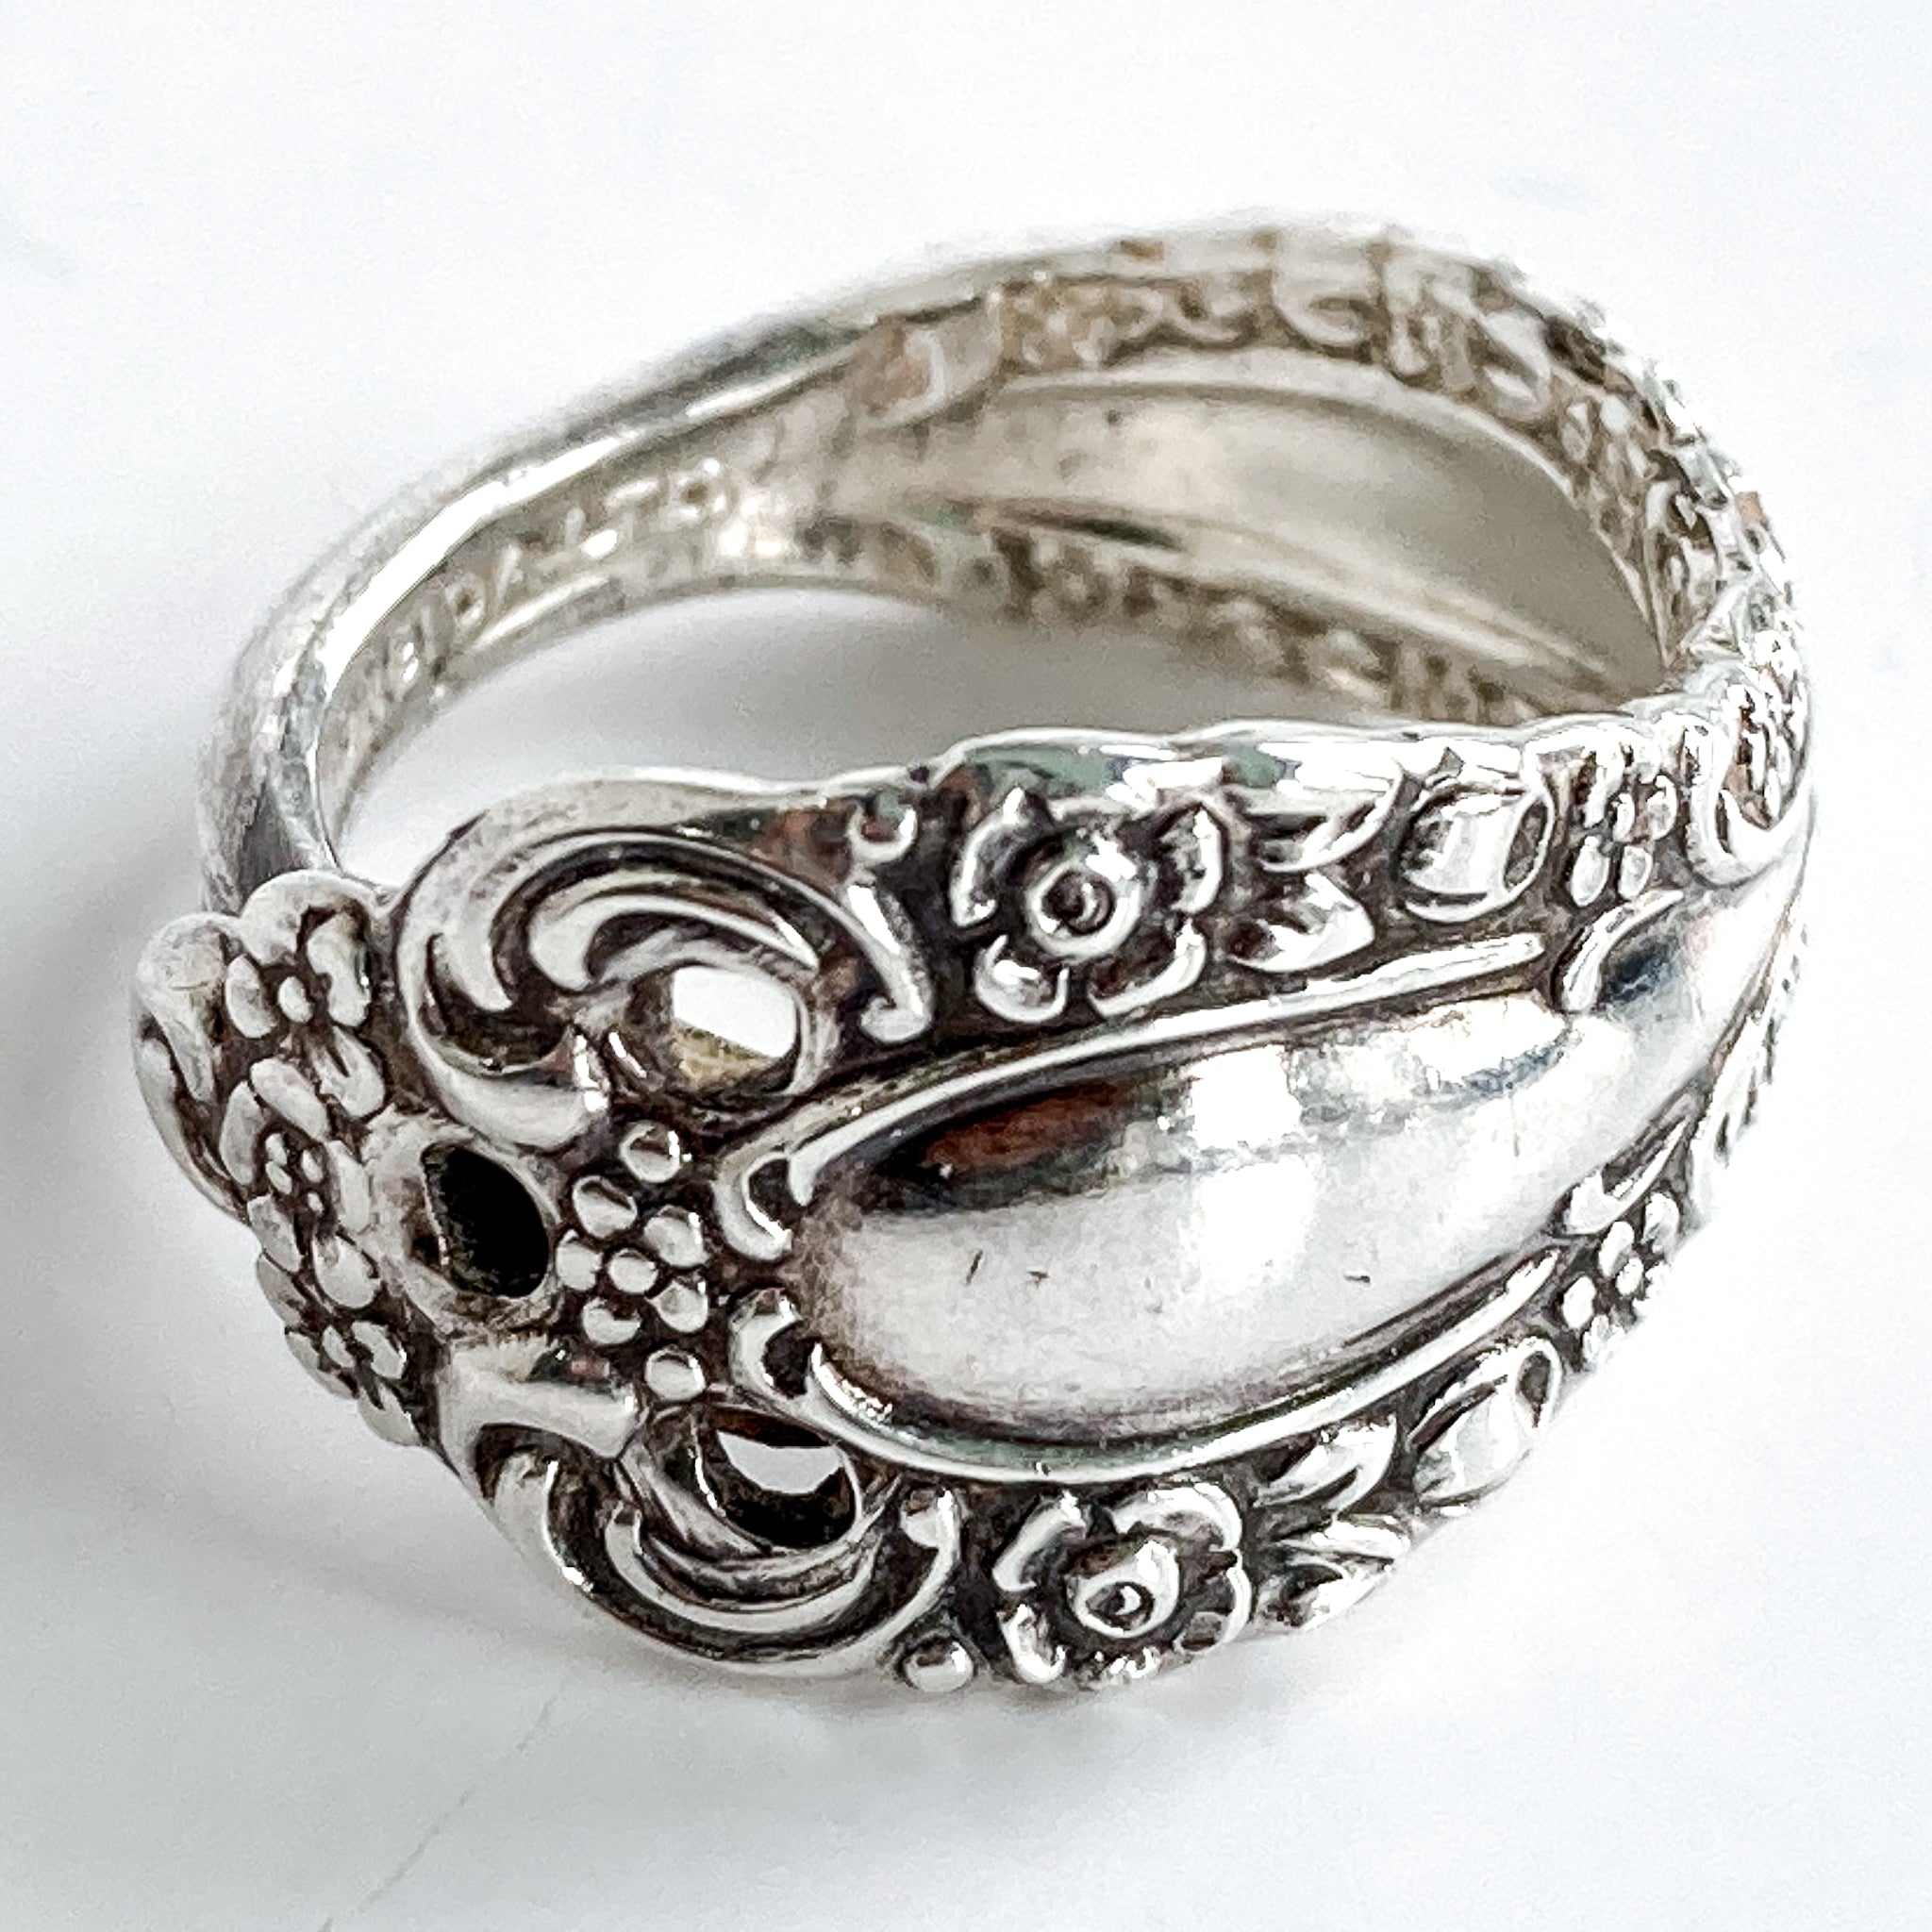 1828 Spiral Repousse Sterling Spoon Ring — LadyForge Jewelry